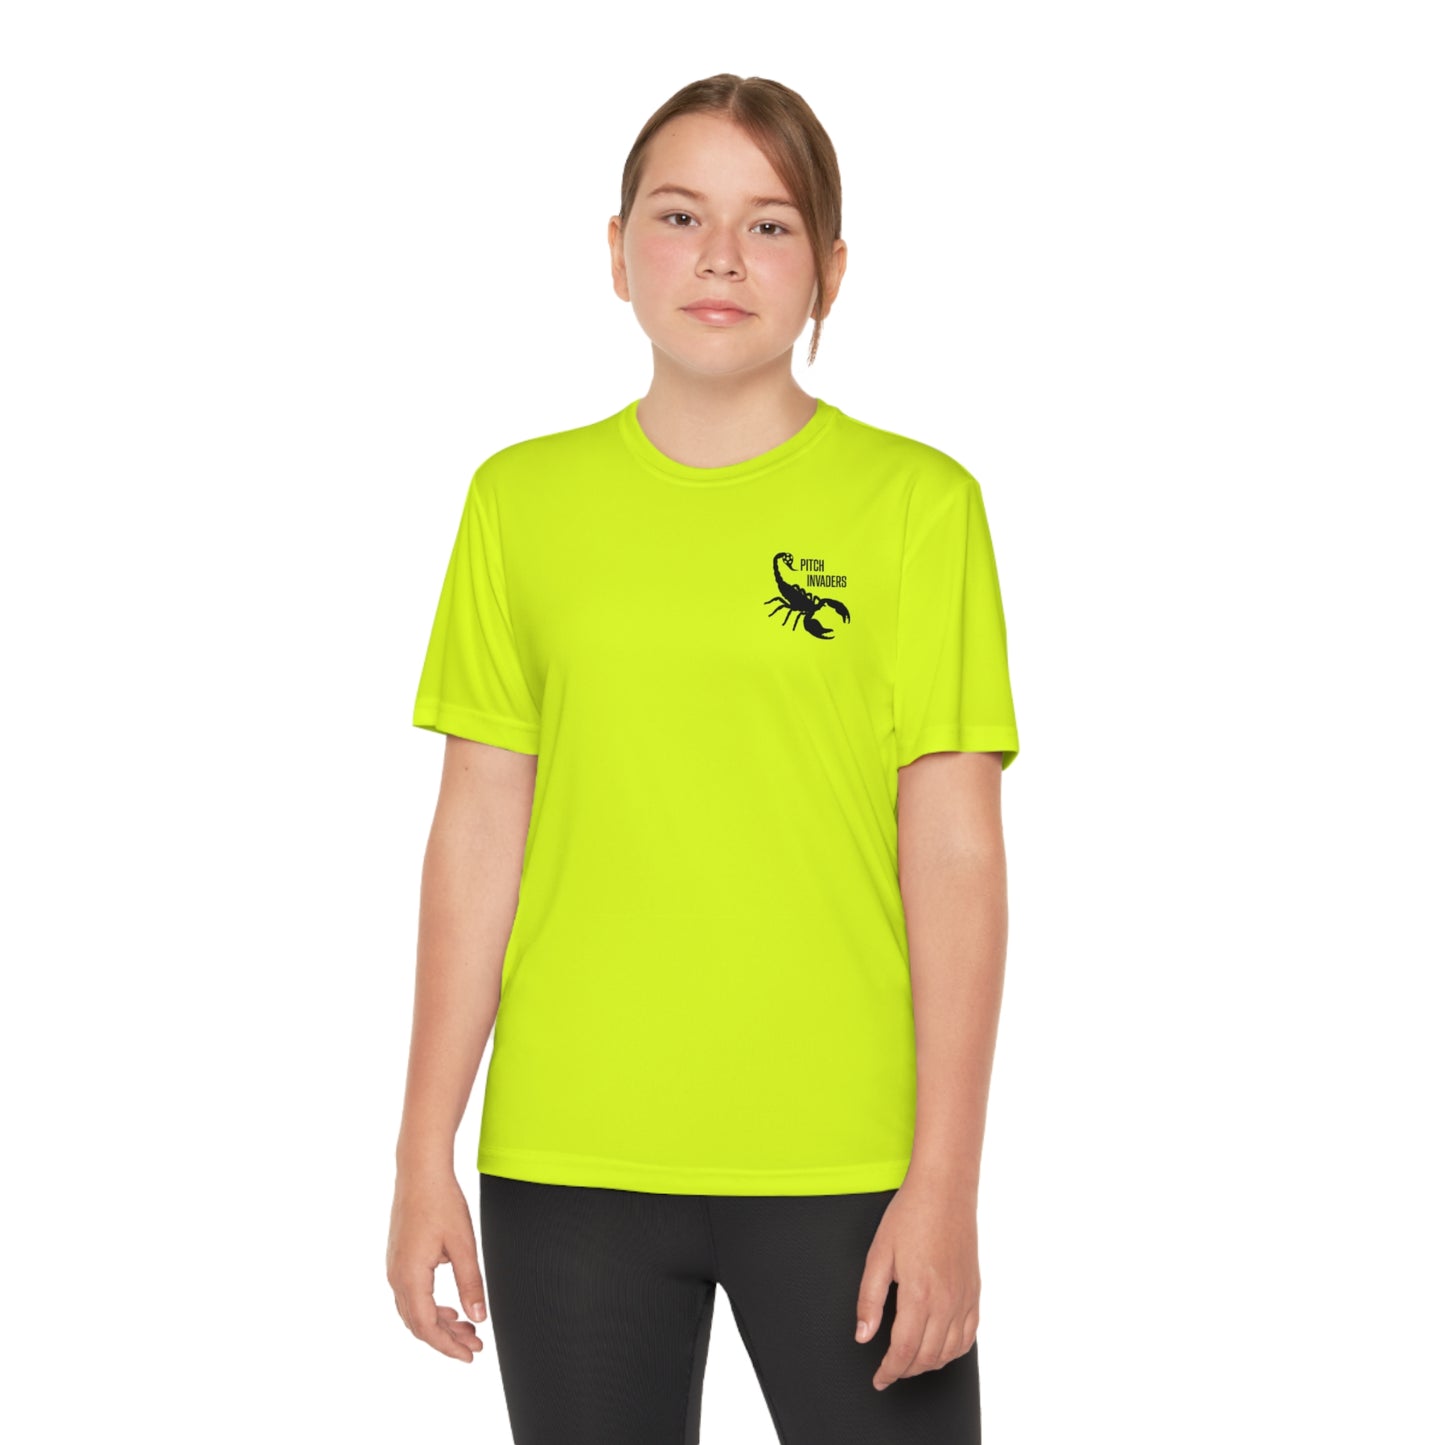 WELCOME TO MY PITCH PARTY Youth Athletic T-Shirt (Unisex)